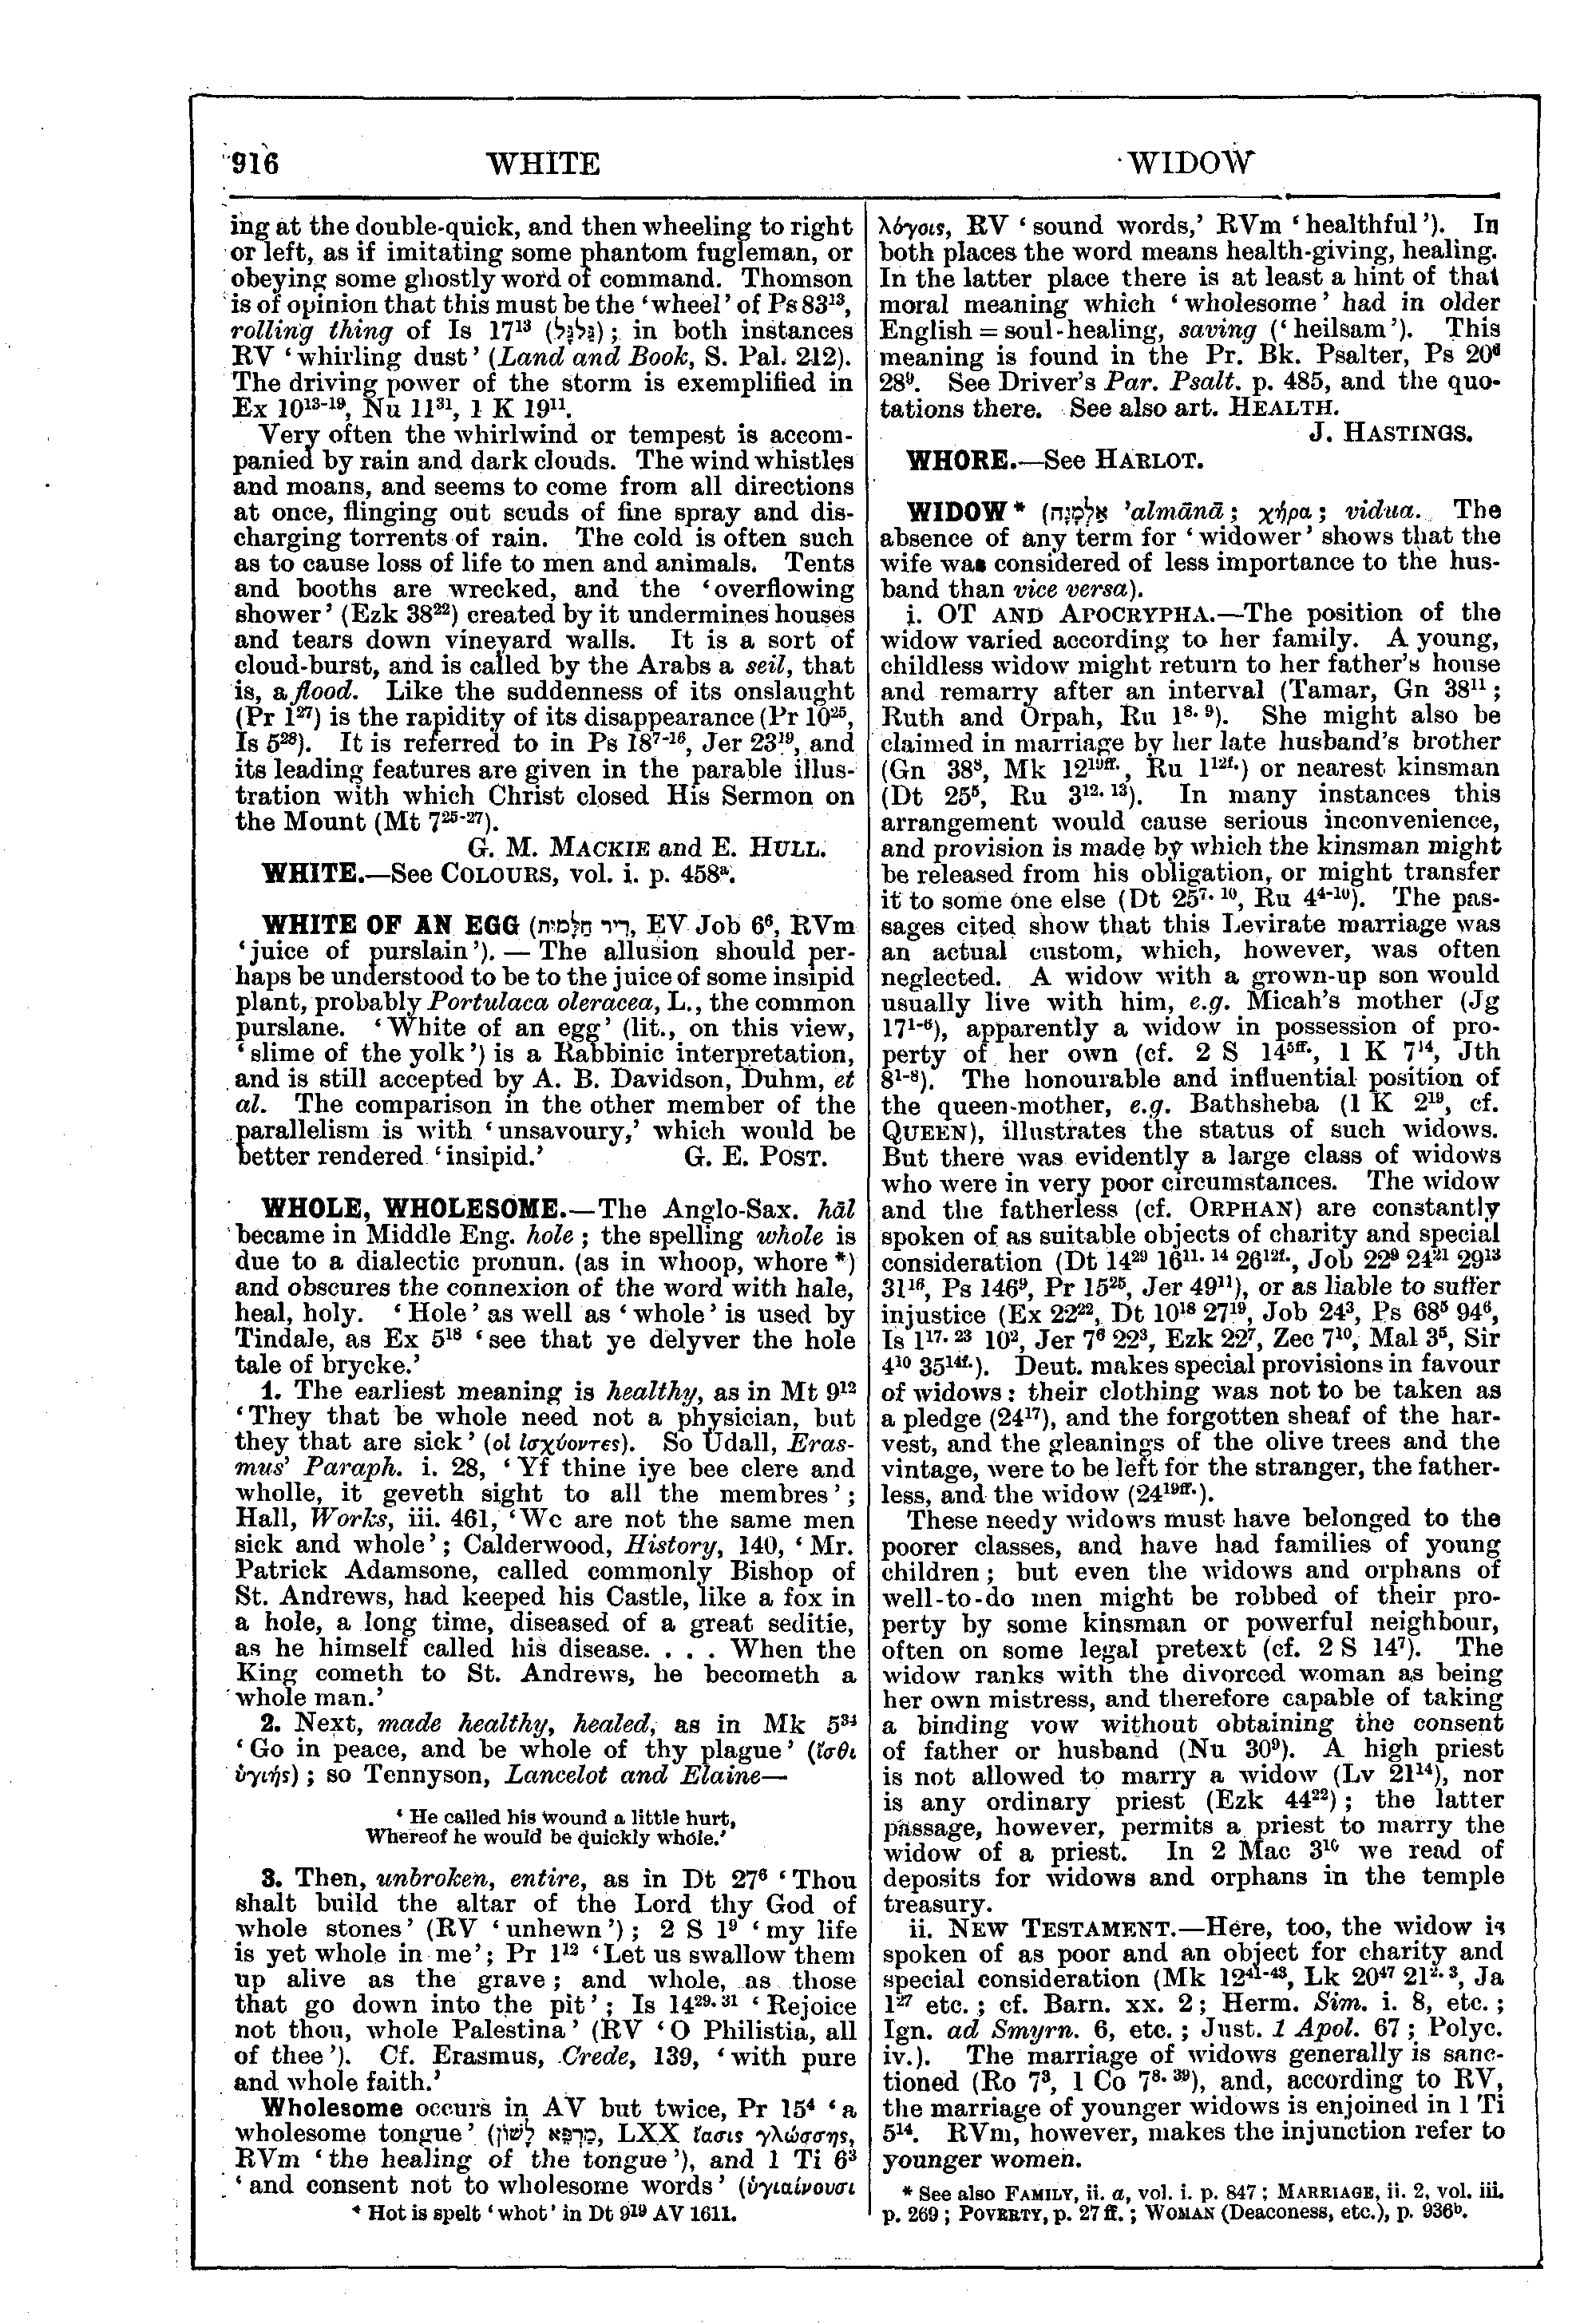 Image of page 916